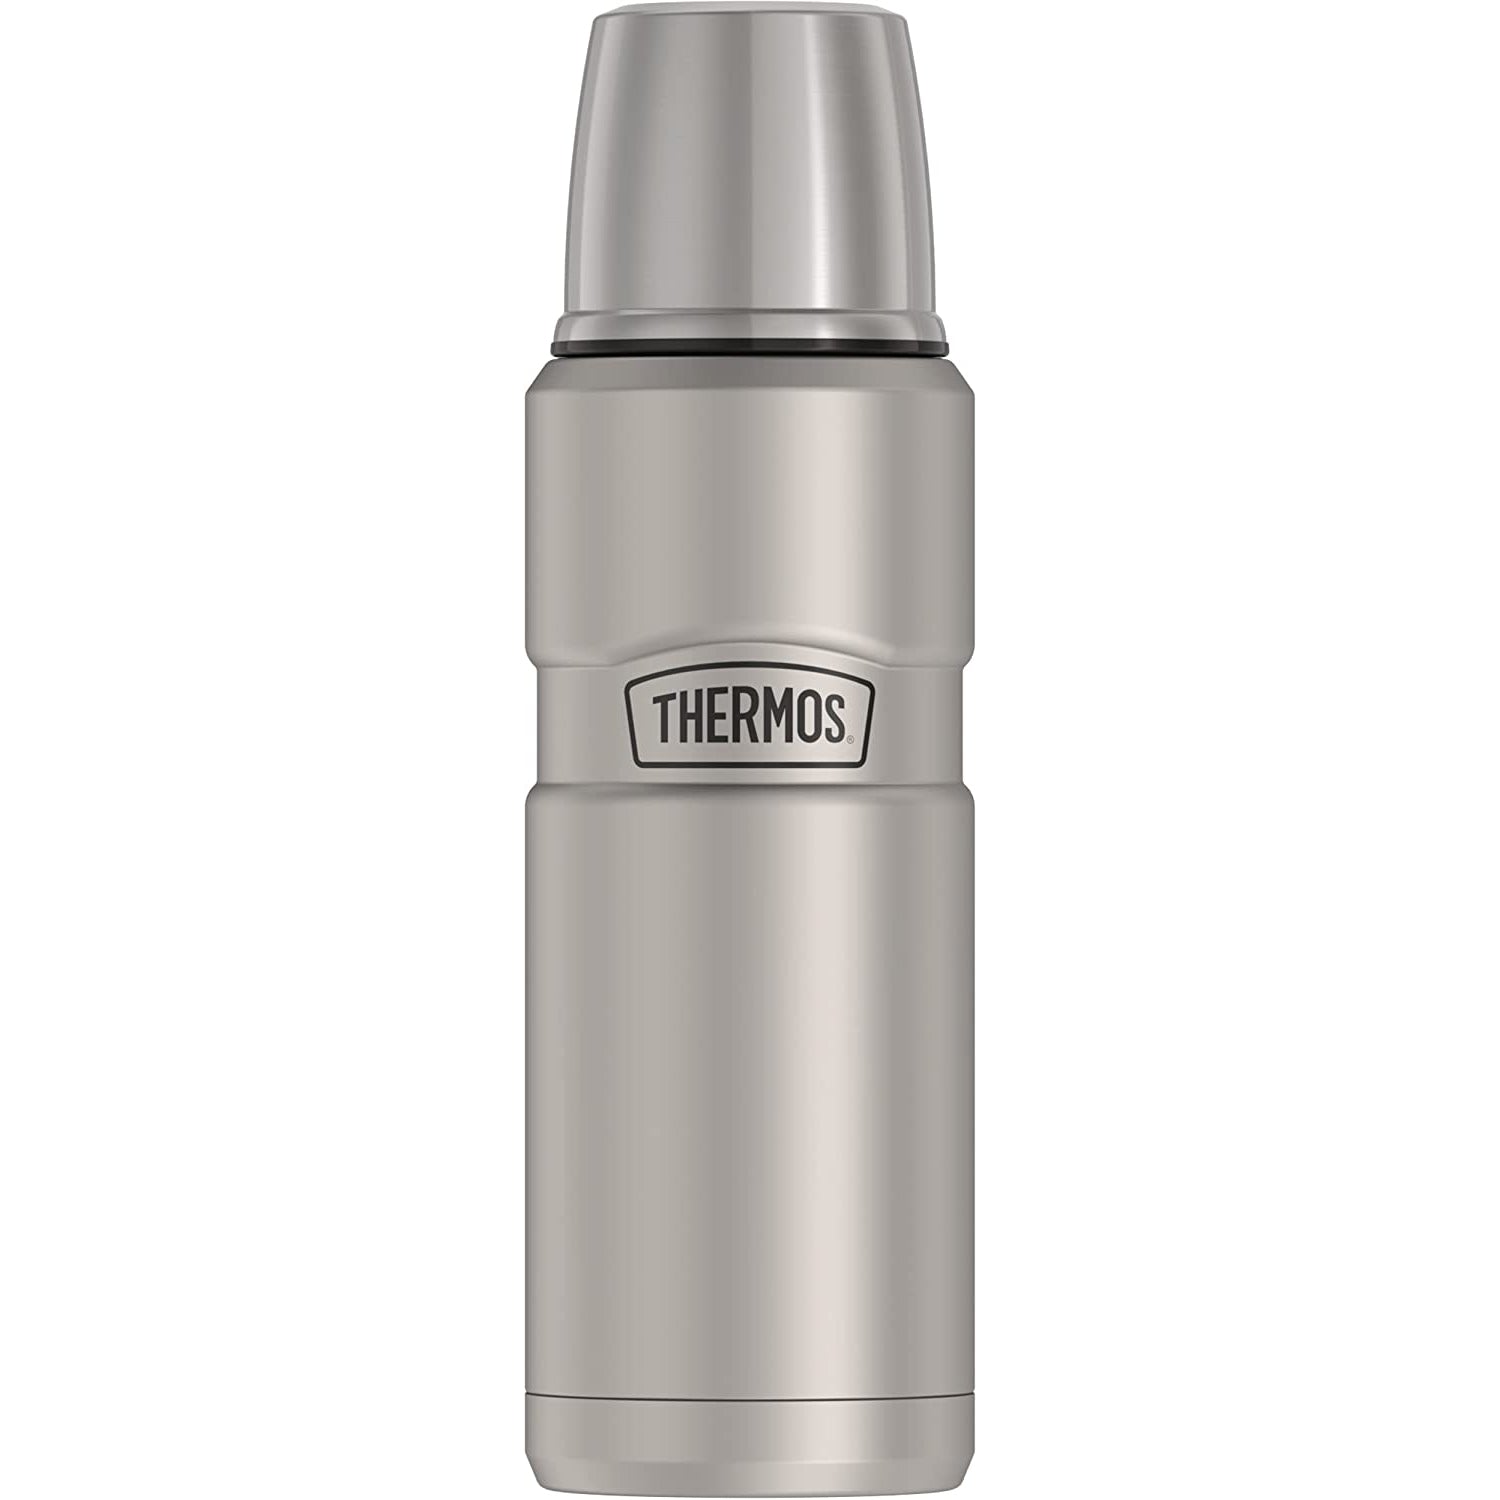 Thermos Stainless King 16 Ounce Compact Bottle - Stainless Steel